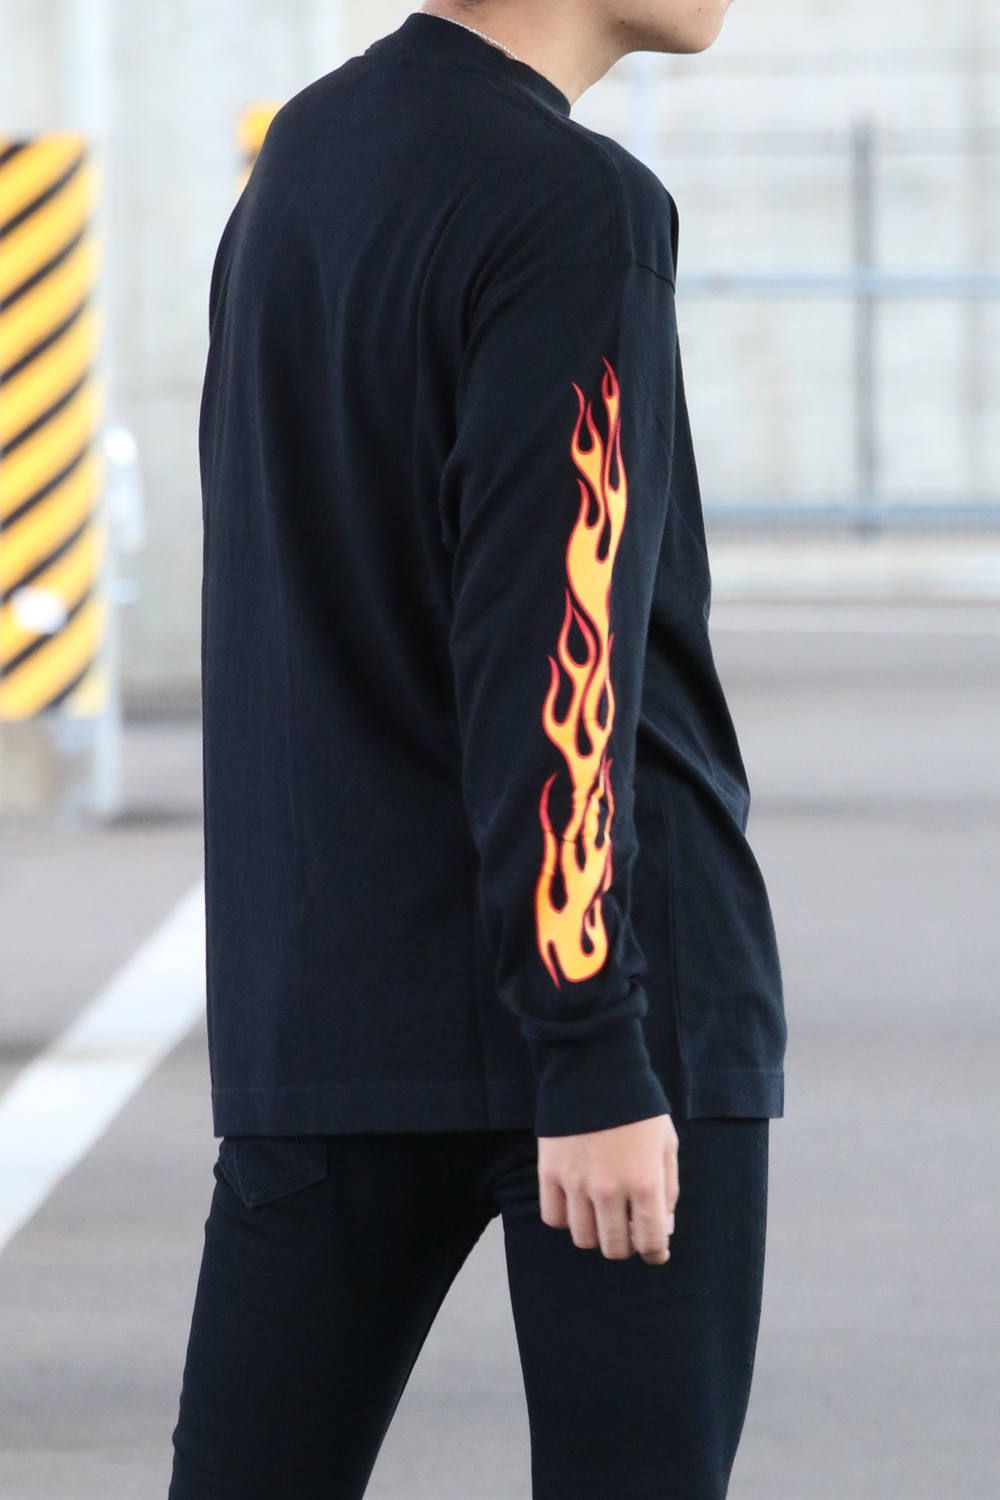 PALM ANGELS - PALMS MS AND FLAMES TEE LS / モックネック 長袖